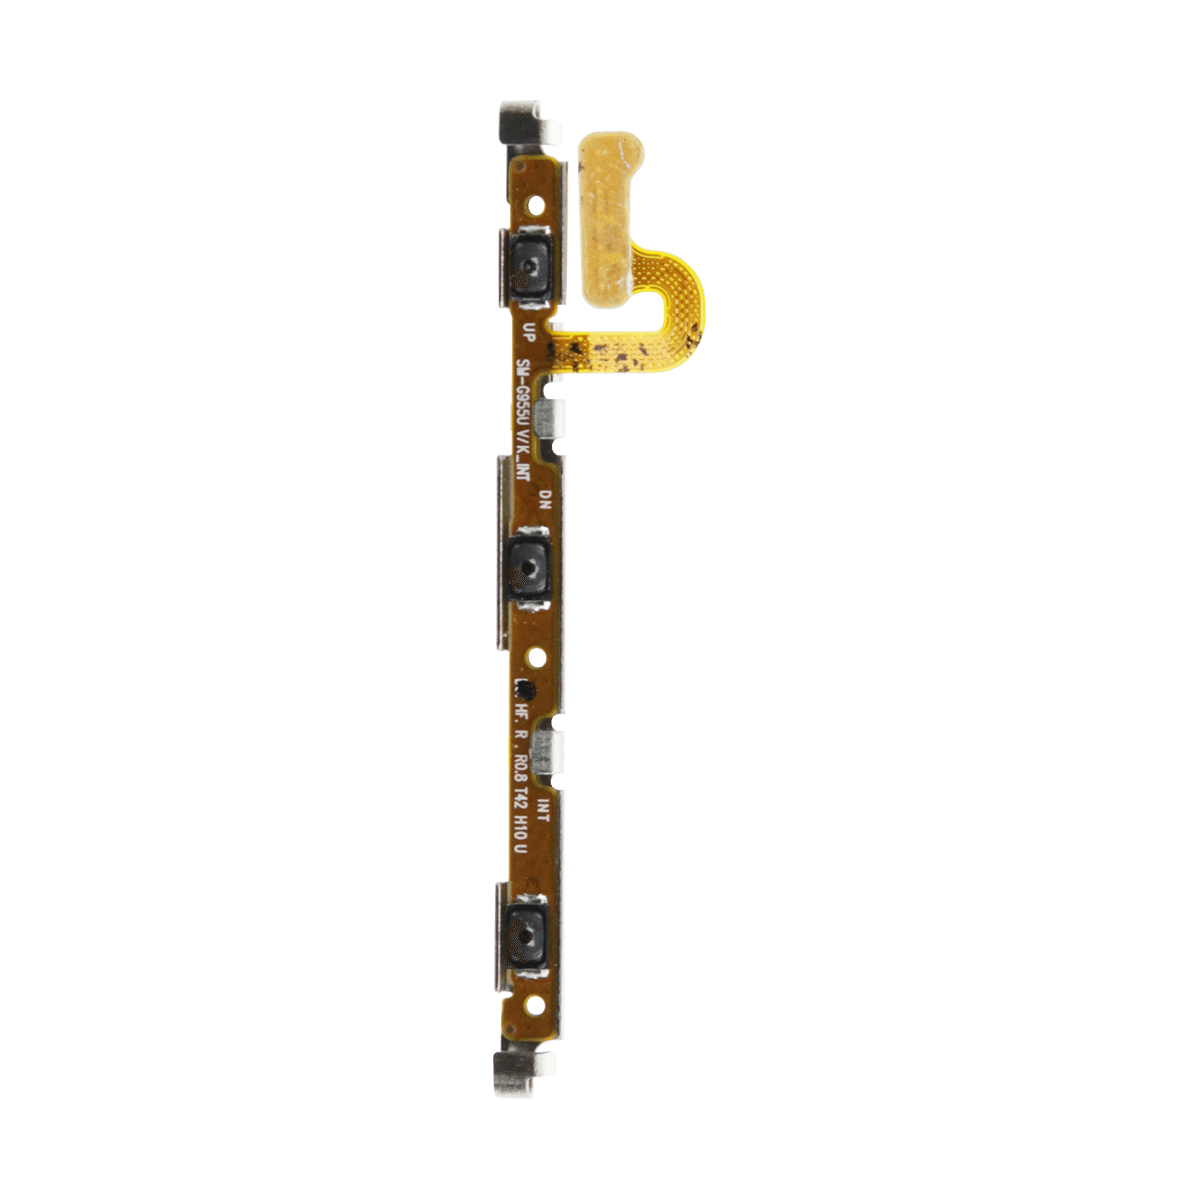 Samsung Galaxy Note 8 / S8 / S8 Plus / A8 Plus / A8 Volume Buttons Flex Cable Replacement